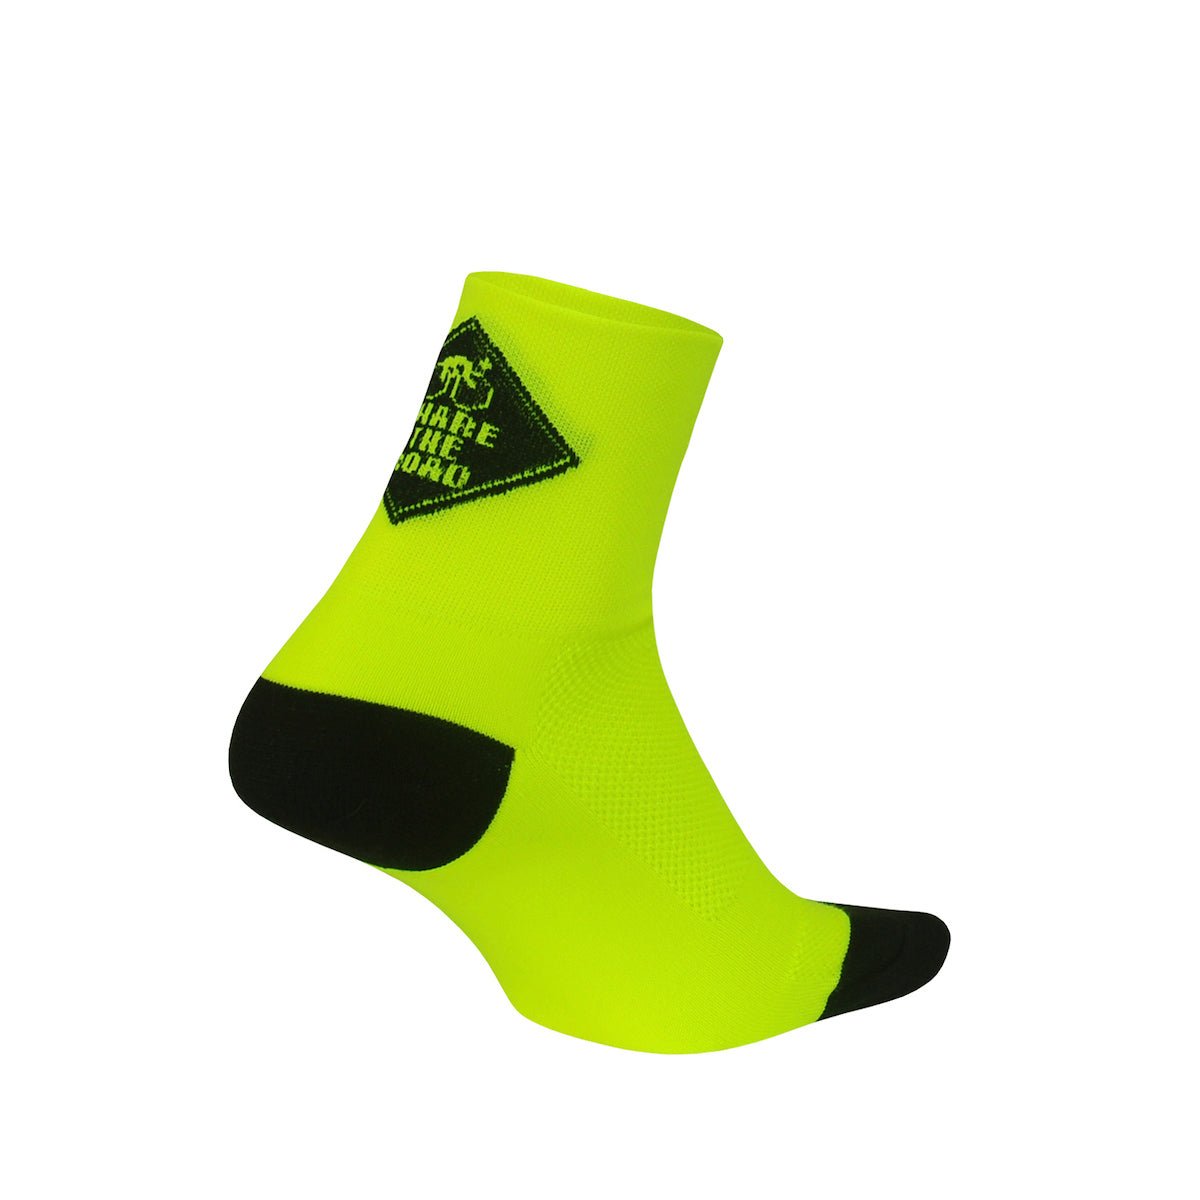 Aireator 3" Share the Road (Neon Yellow/Black) - DeFeet